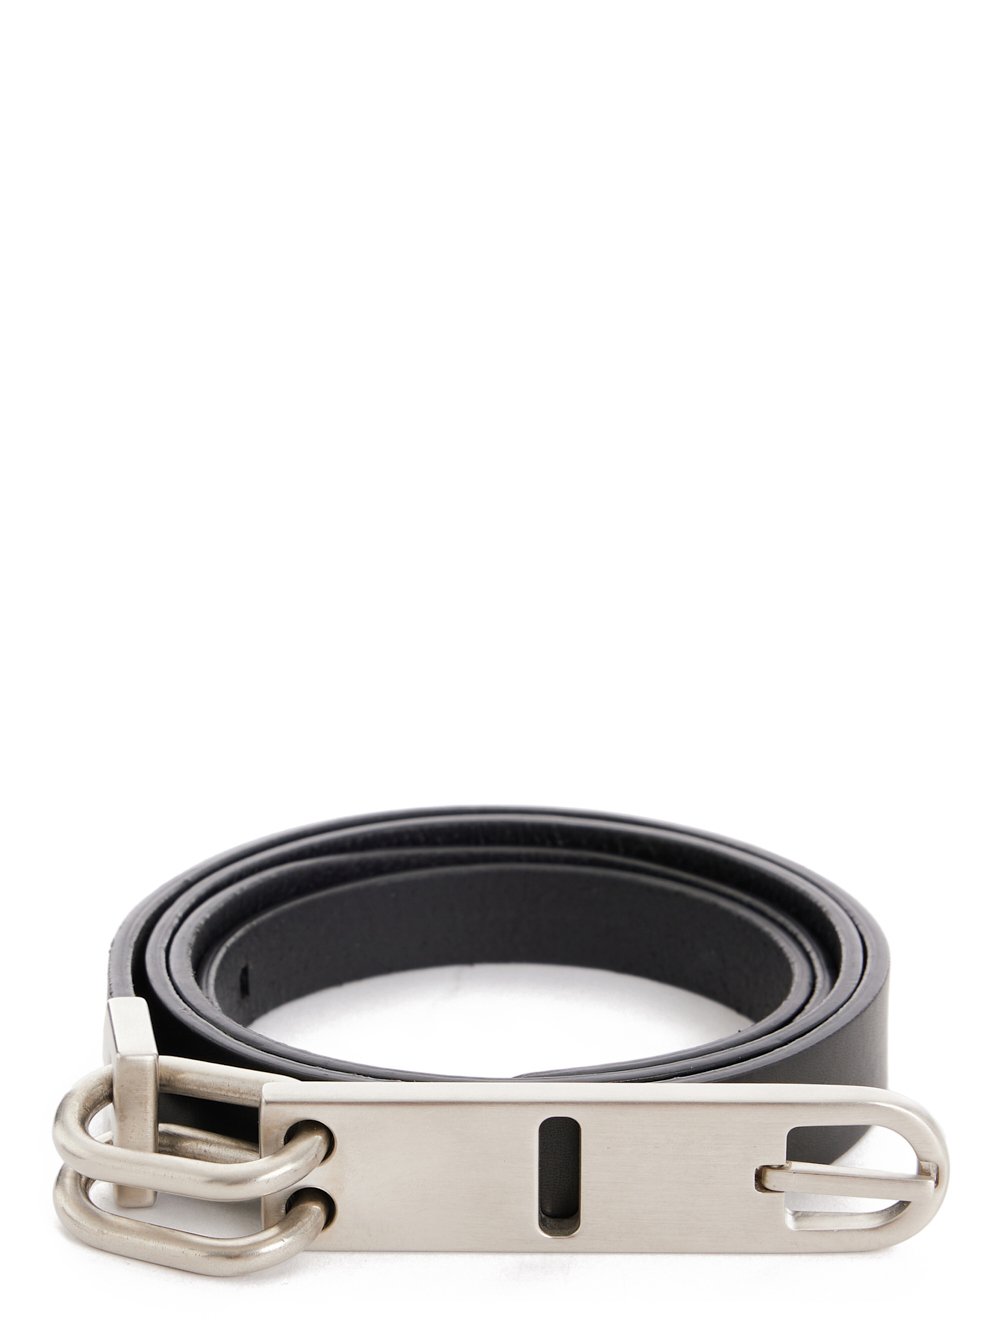 RICK OWENS FW23 LUXOR TONGUE BELT IN BLACK GROPPONE COW LEATHER